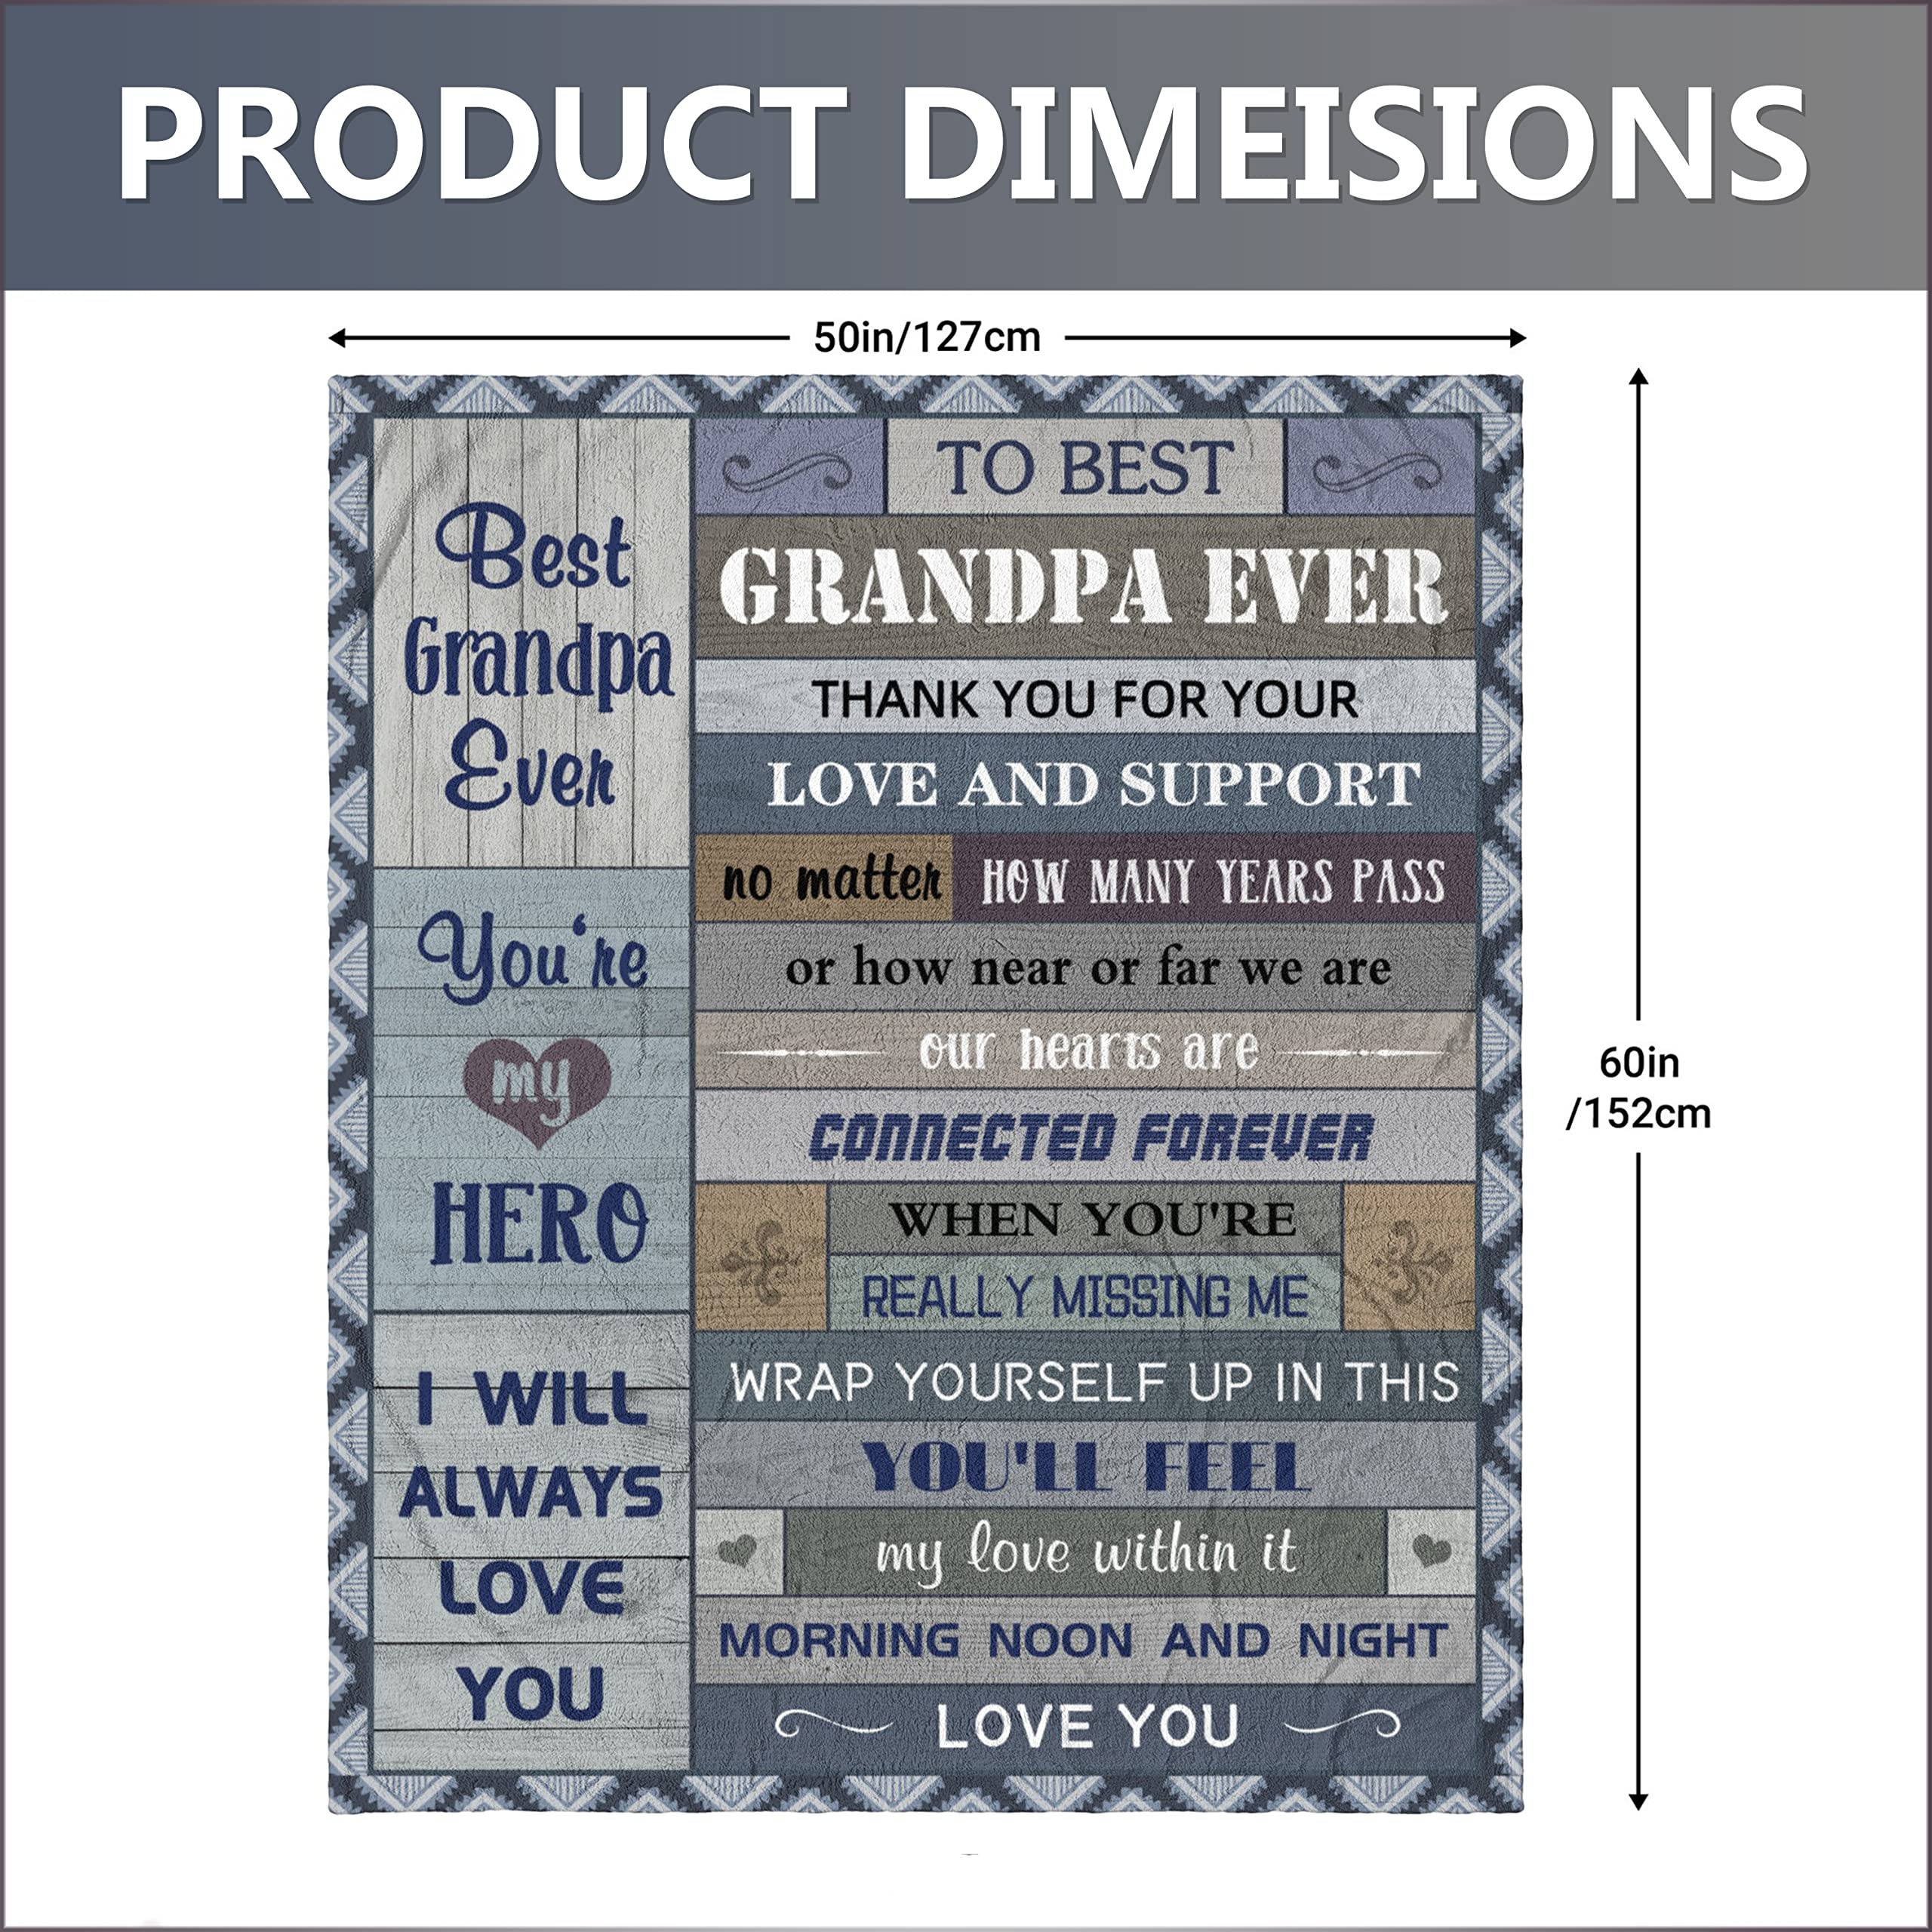 💖For Dad Blanket👨Gifts For Dad Grandpa, Dad Birthday Gift, To My Dad Blanket